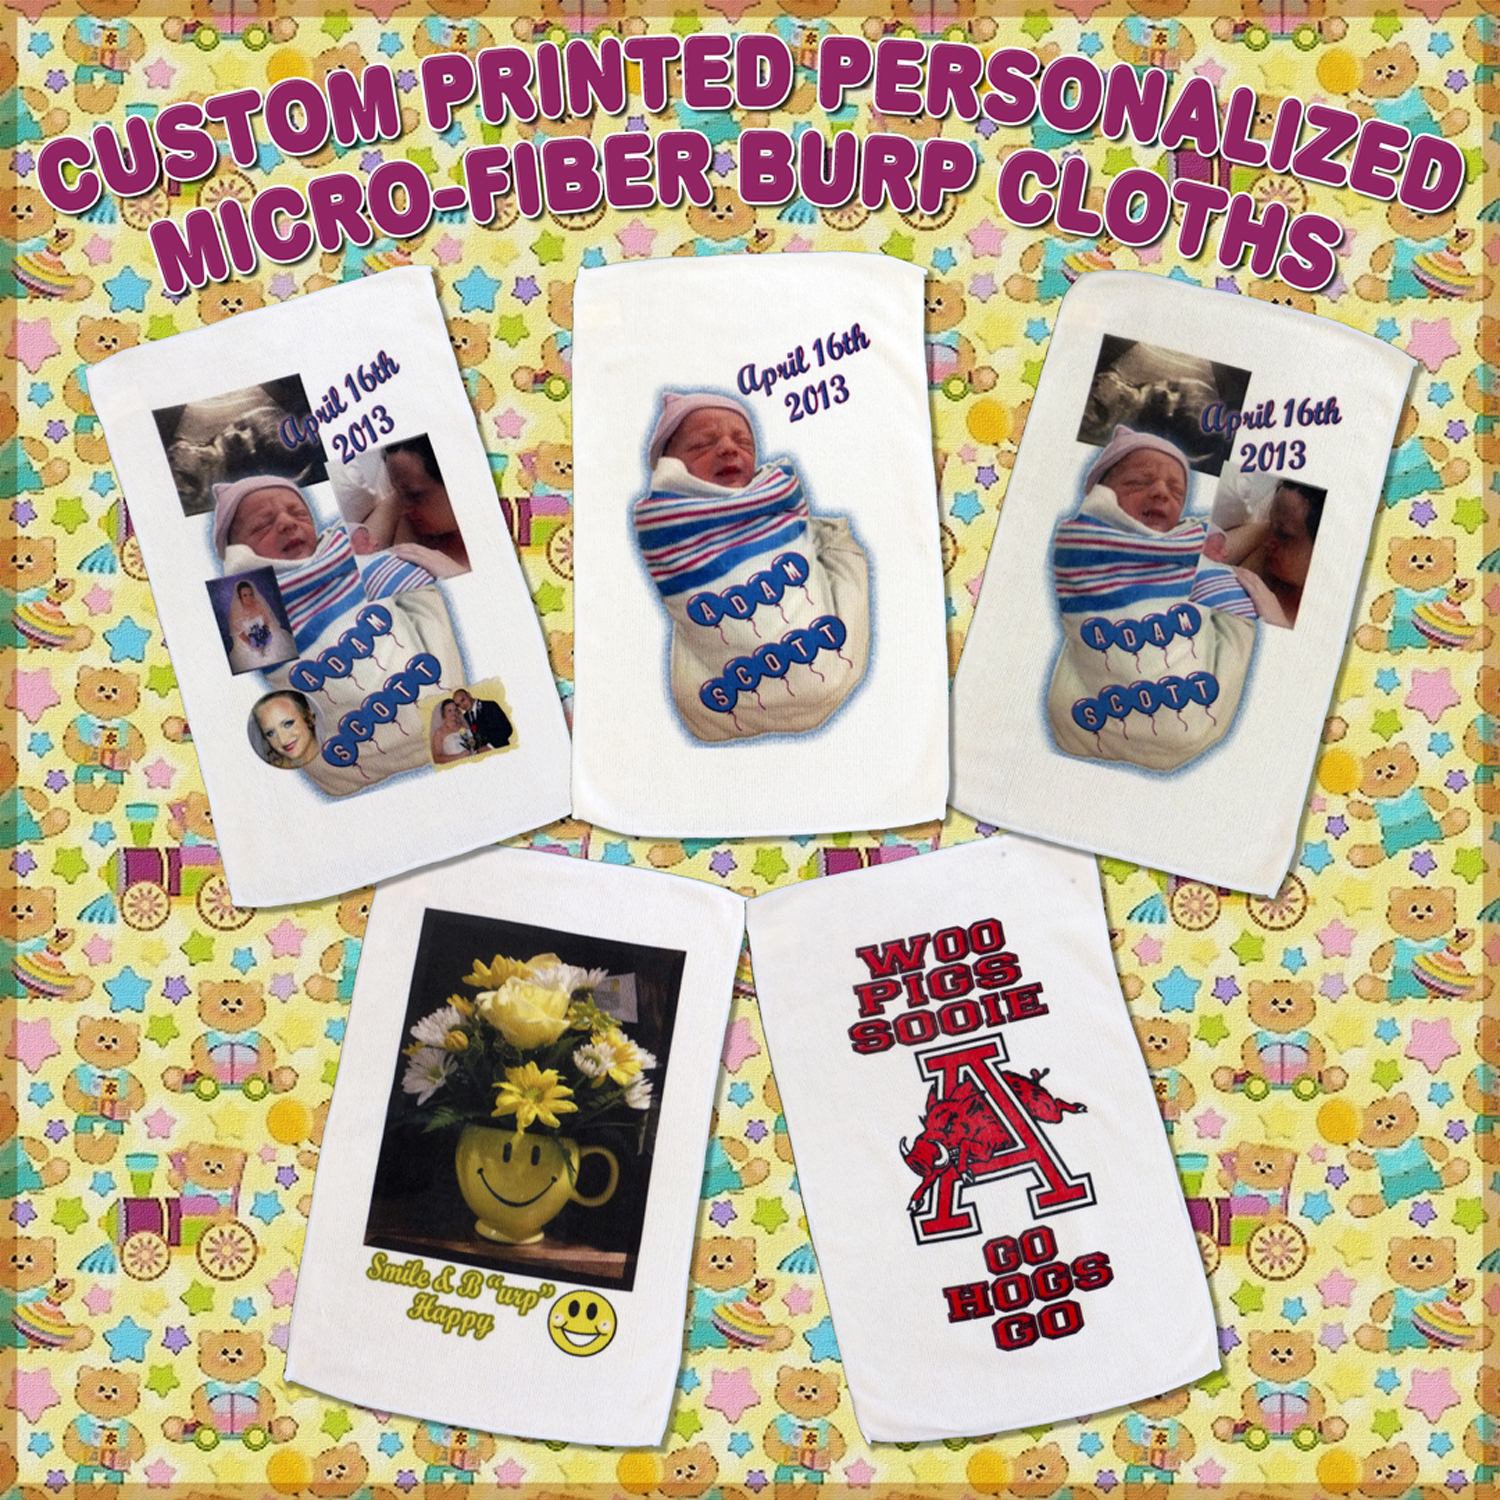 Burp Cloths Custom Printed Personalized Design Micro-Fiber made with sublimation printing